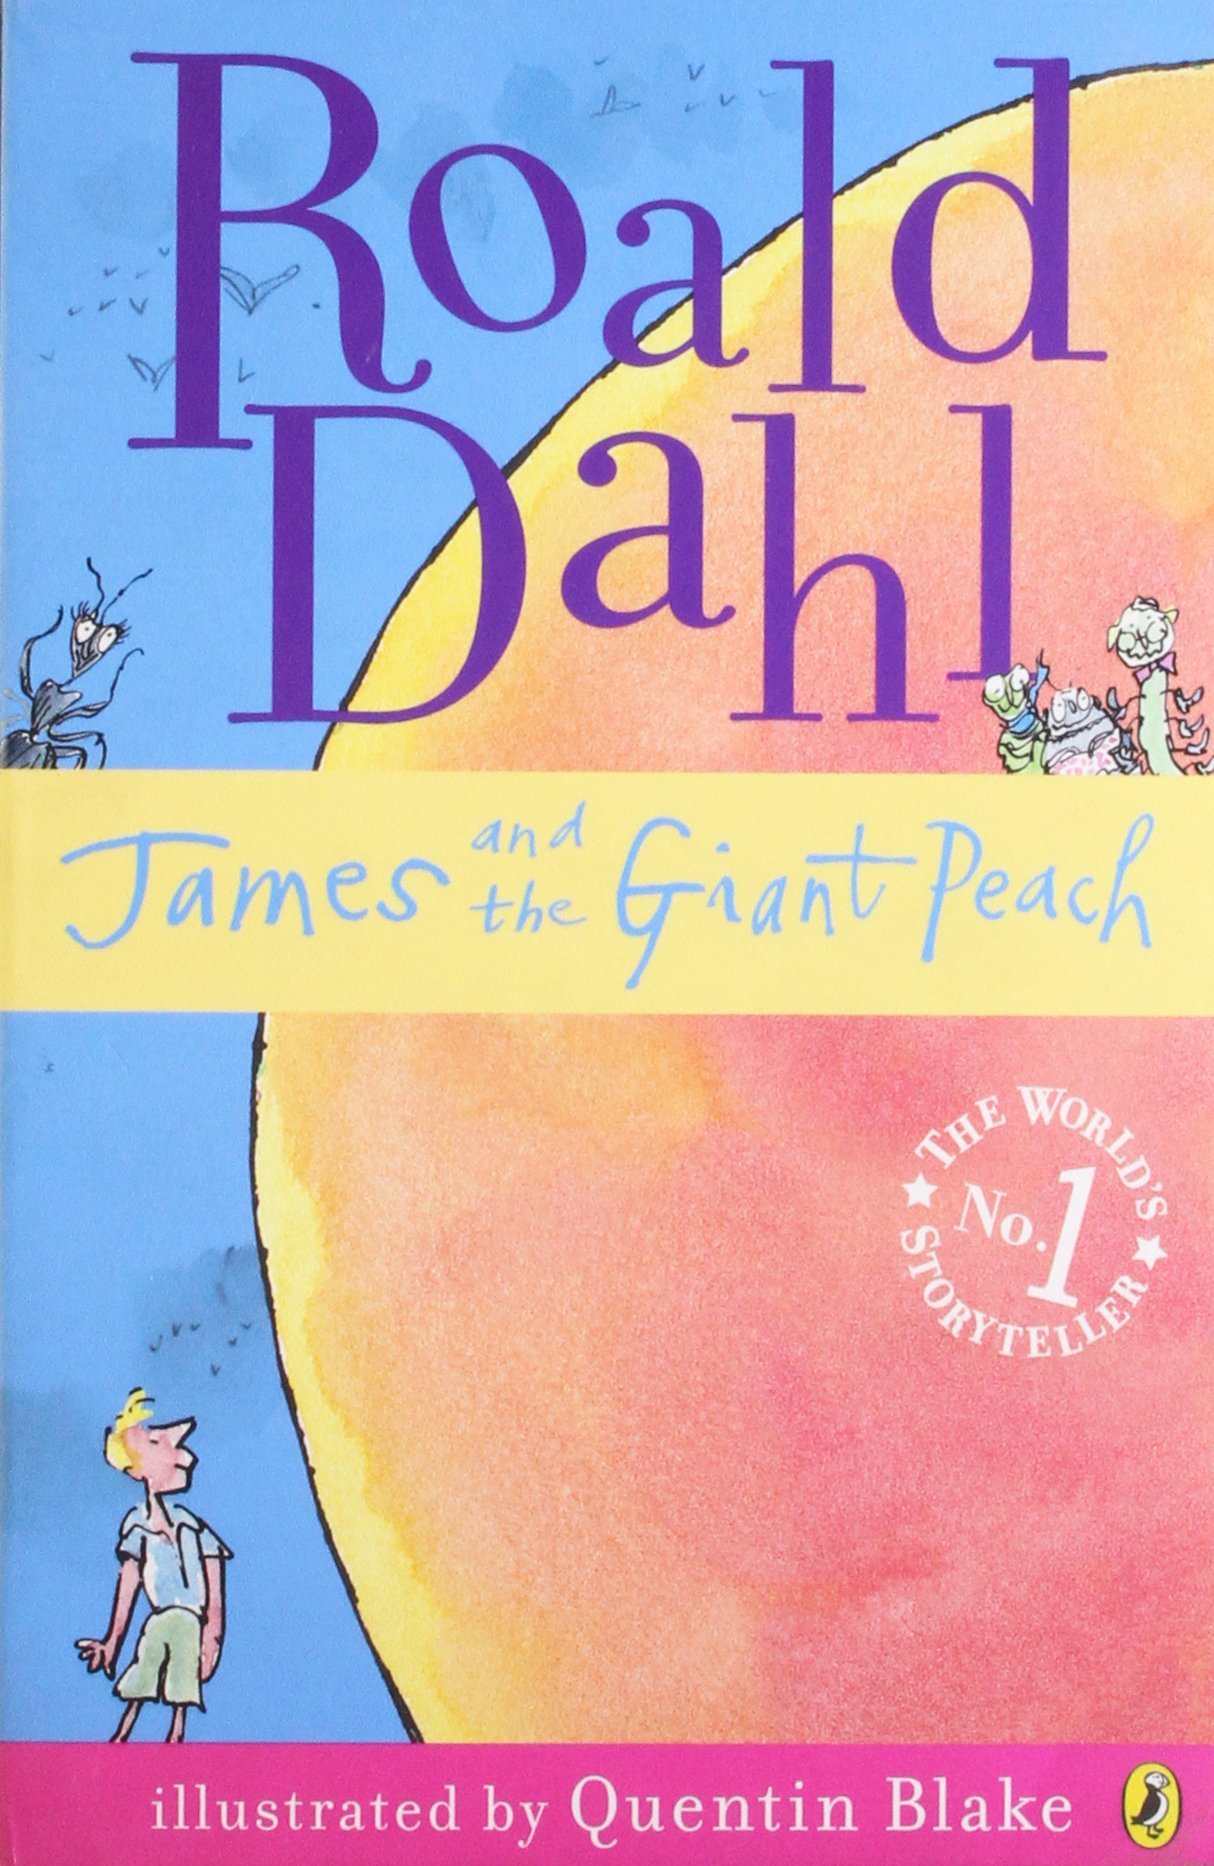 james and the giant peach book review